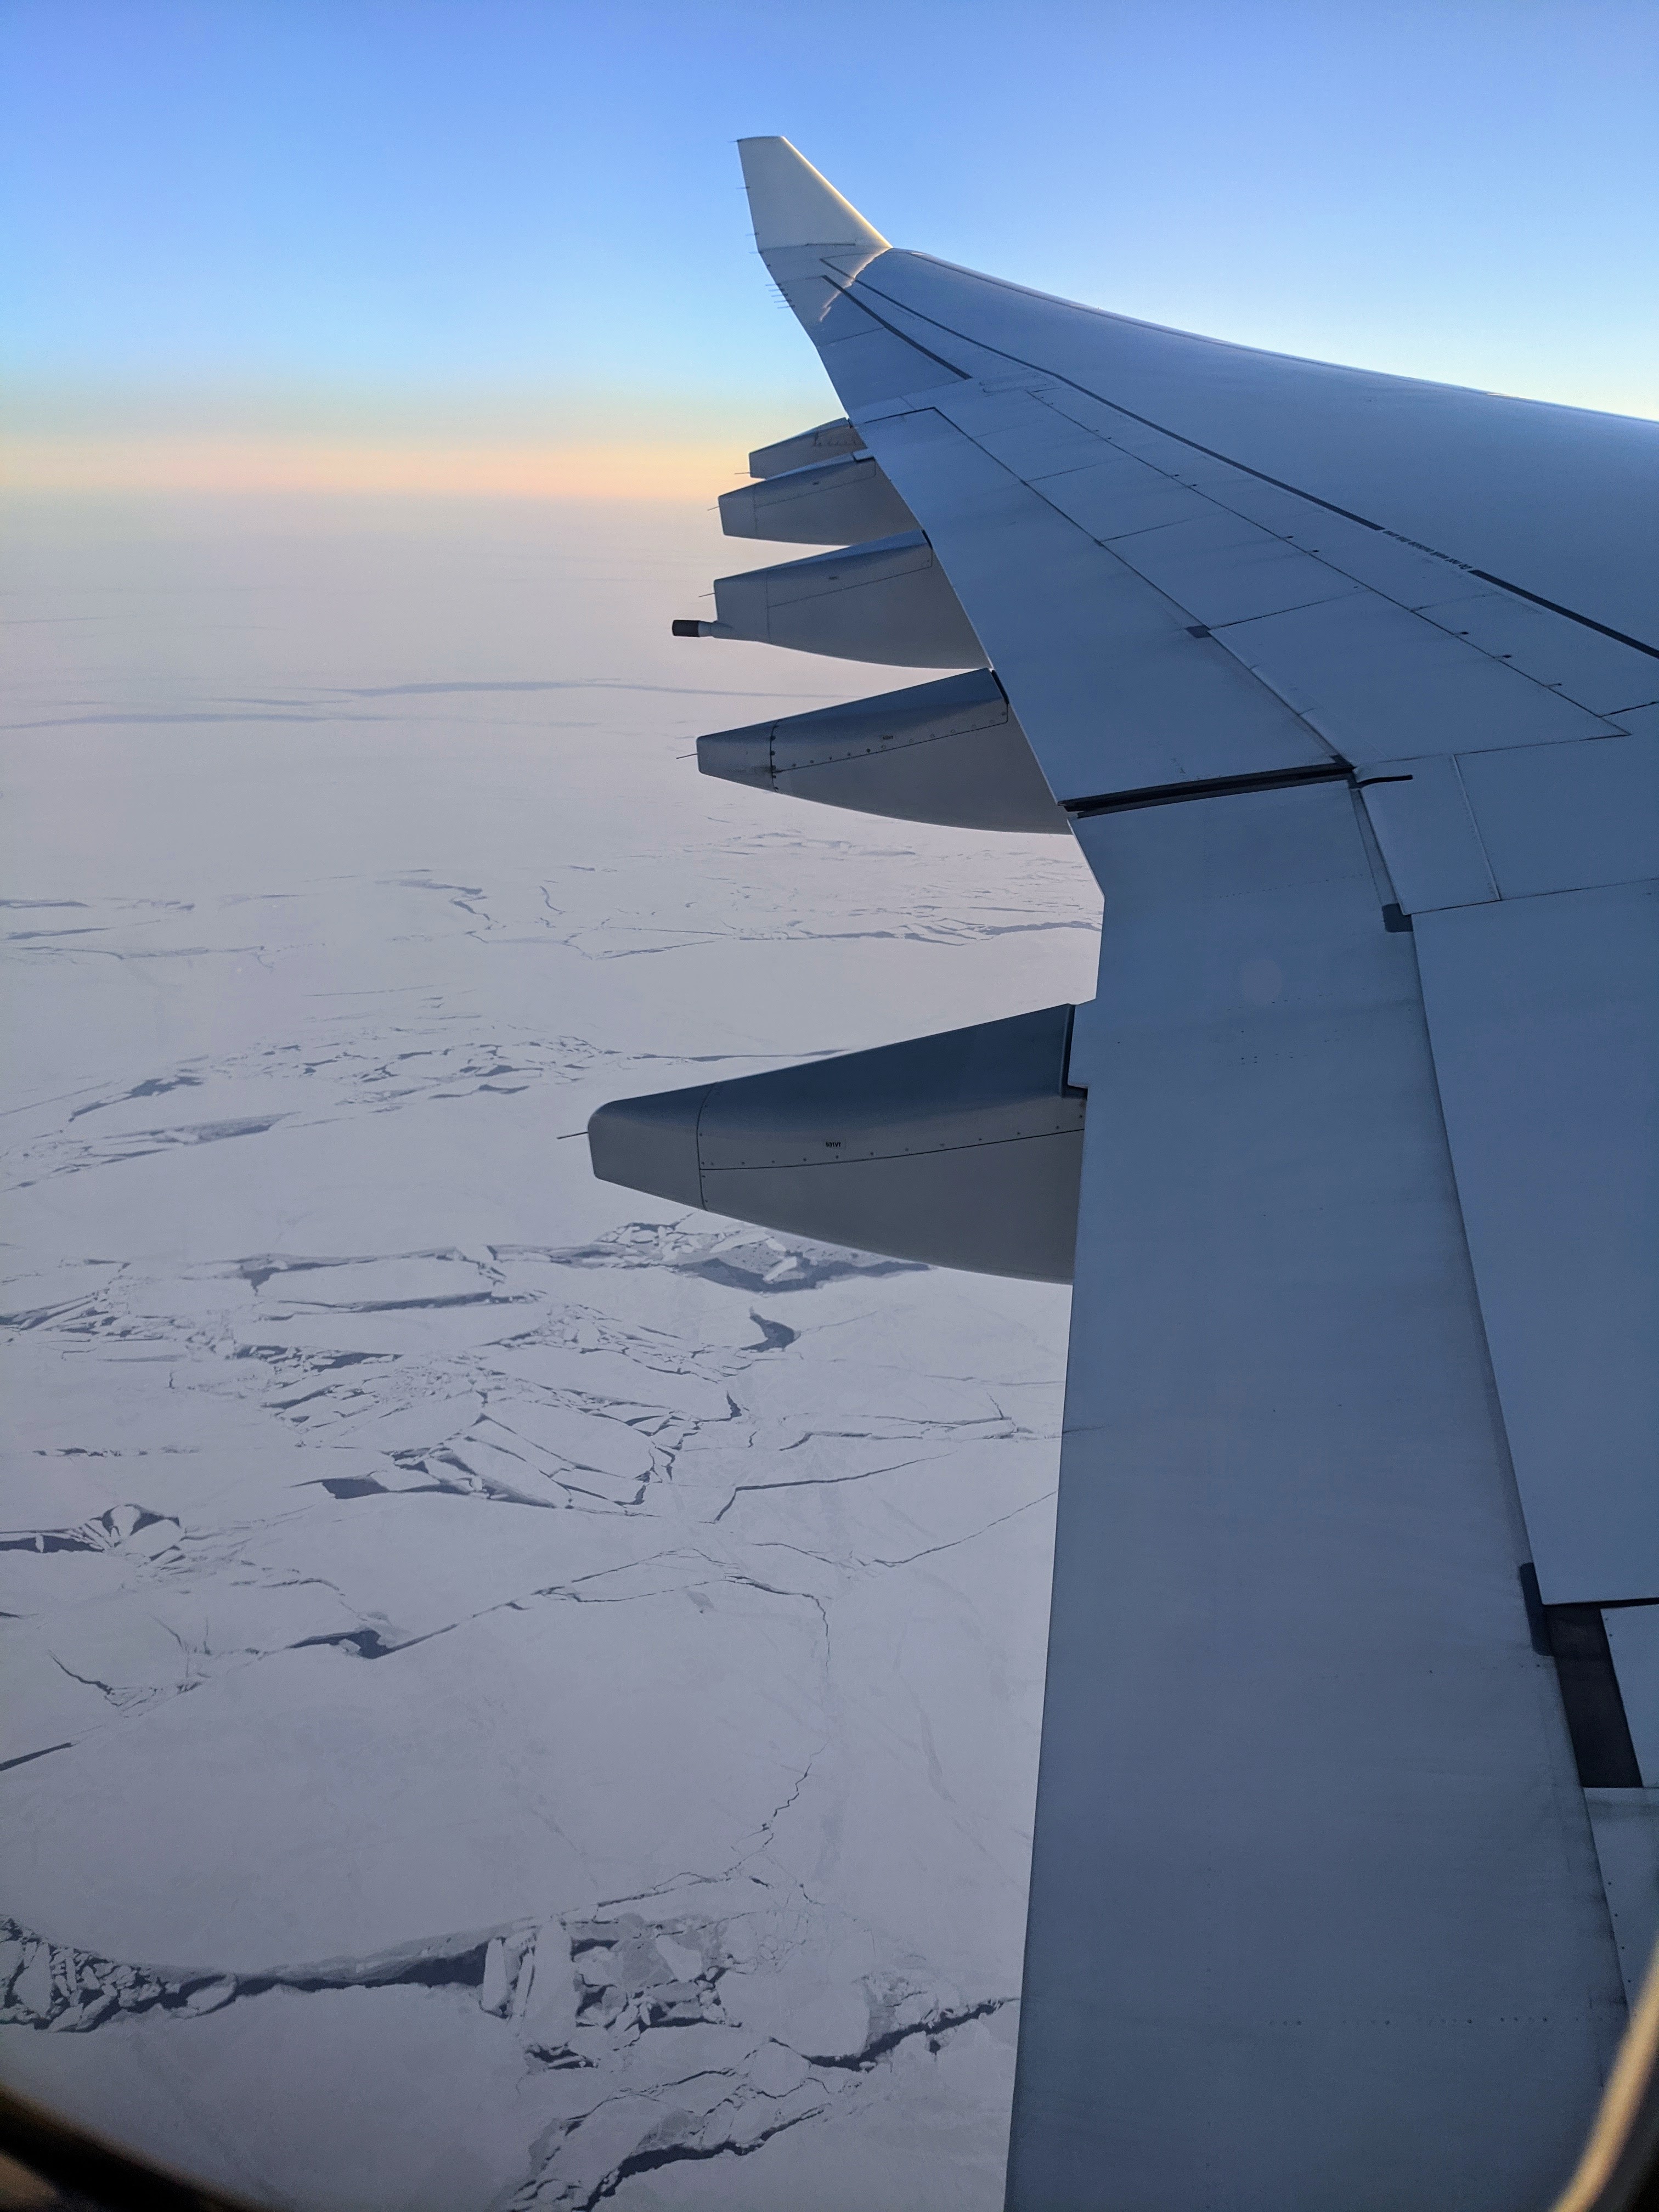 Over the arctic ice